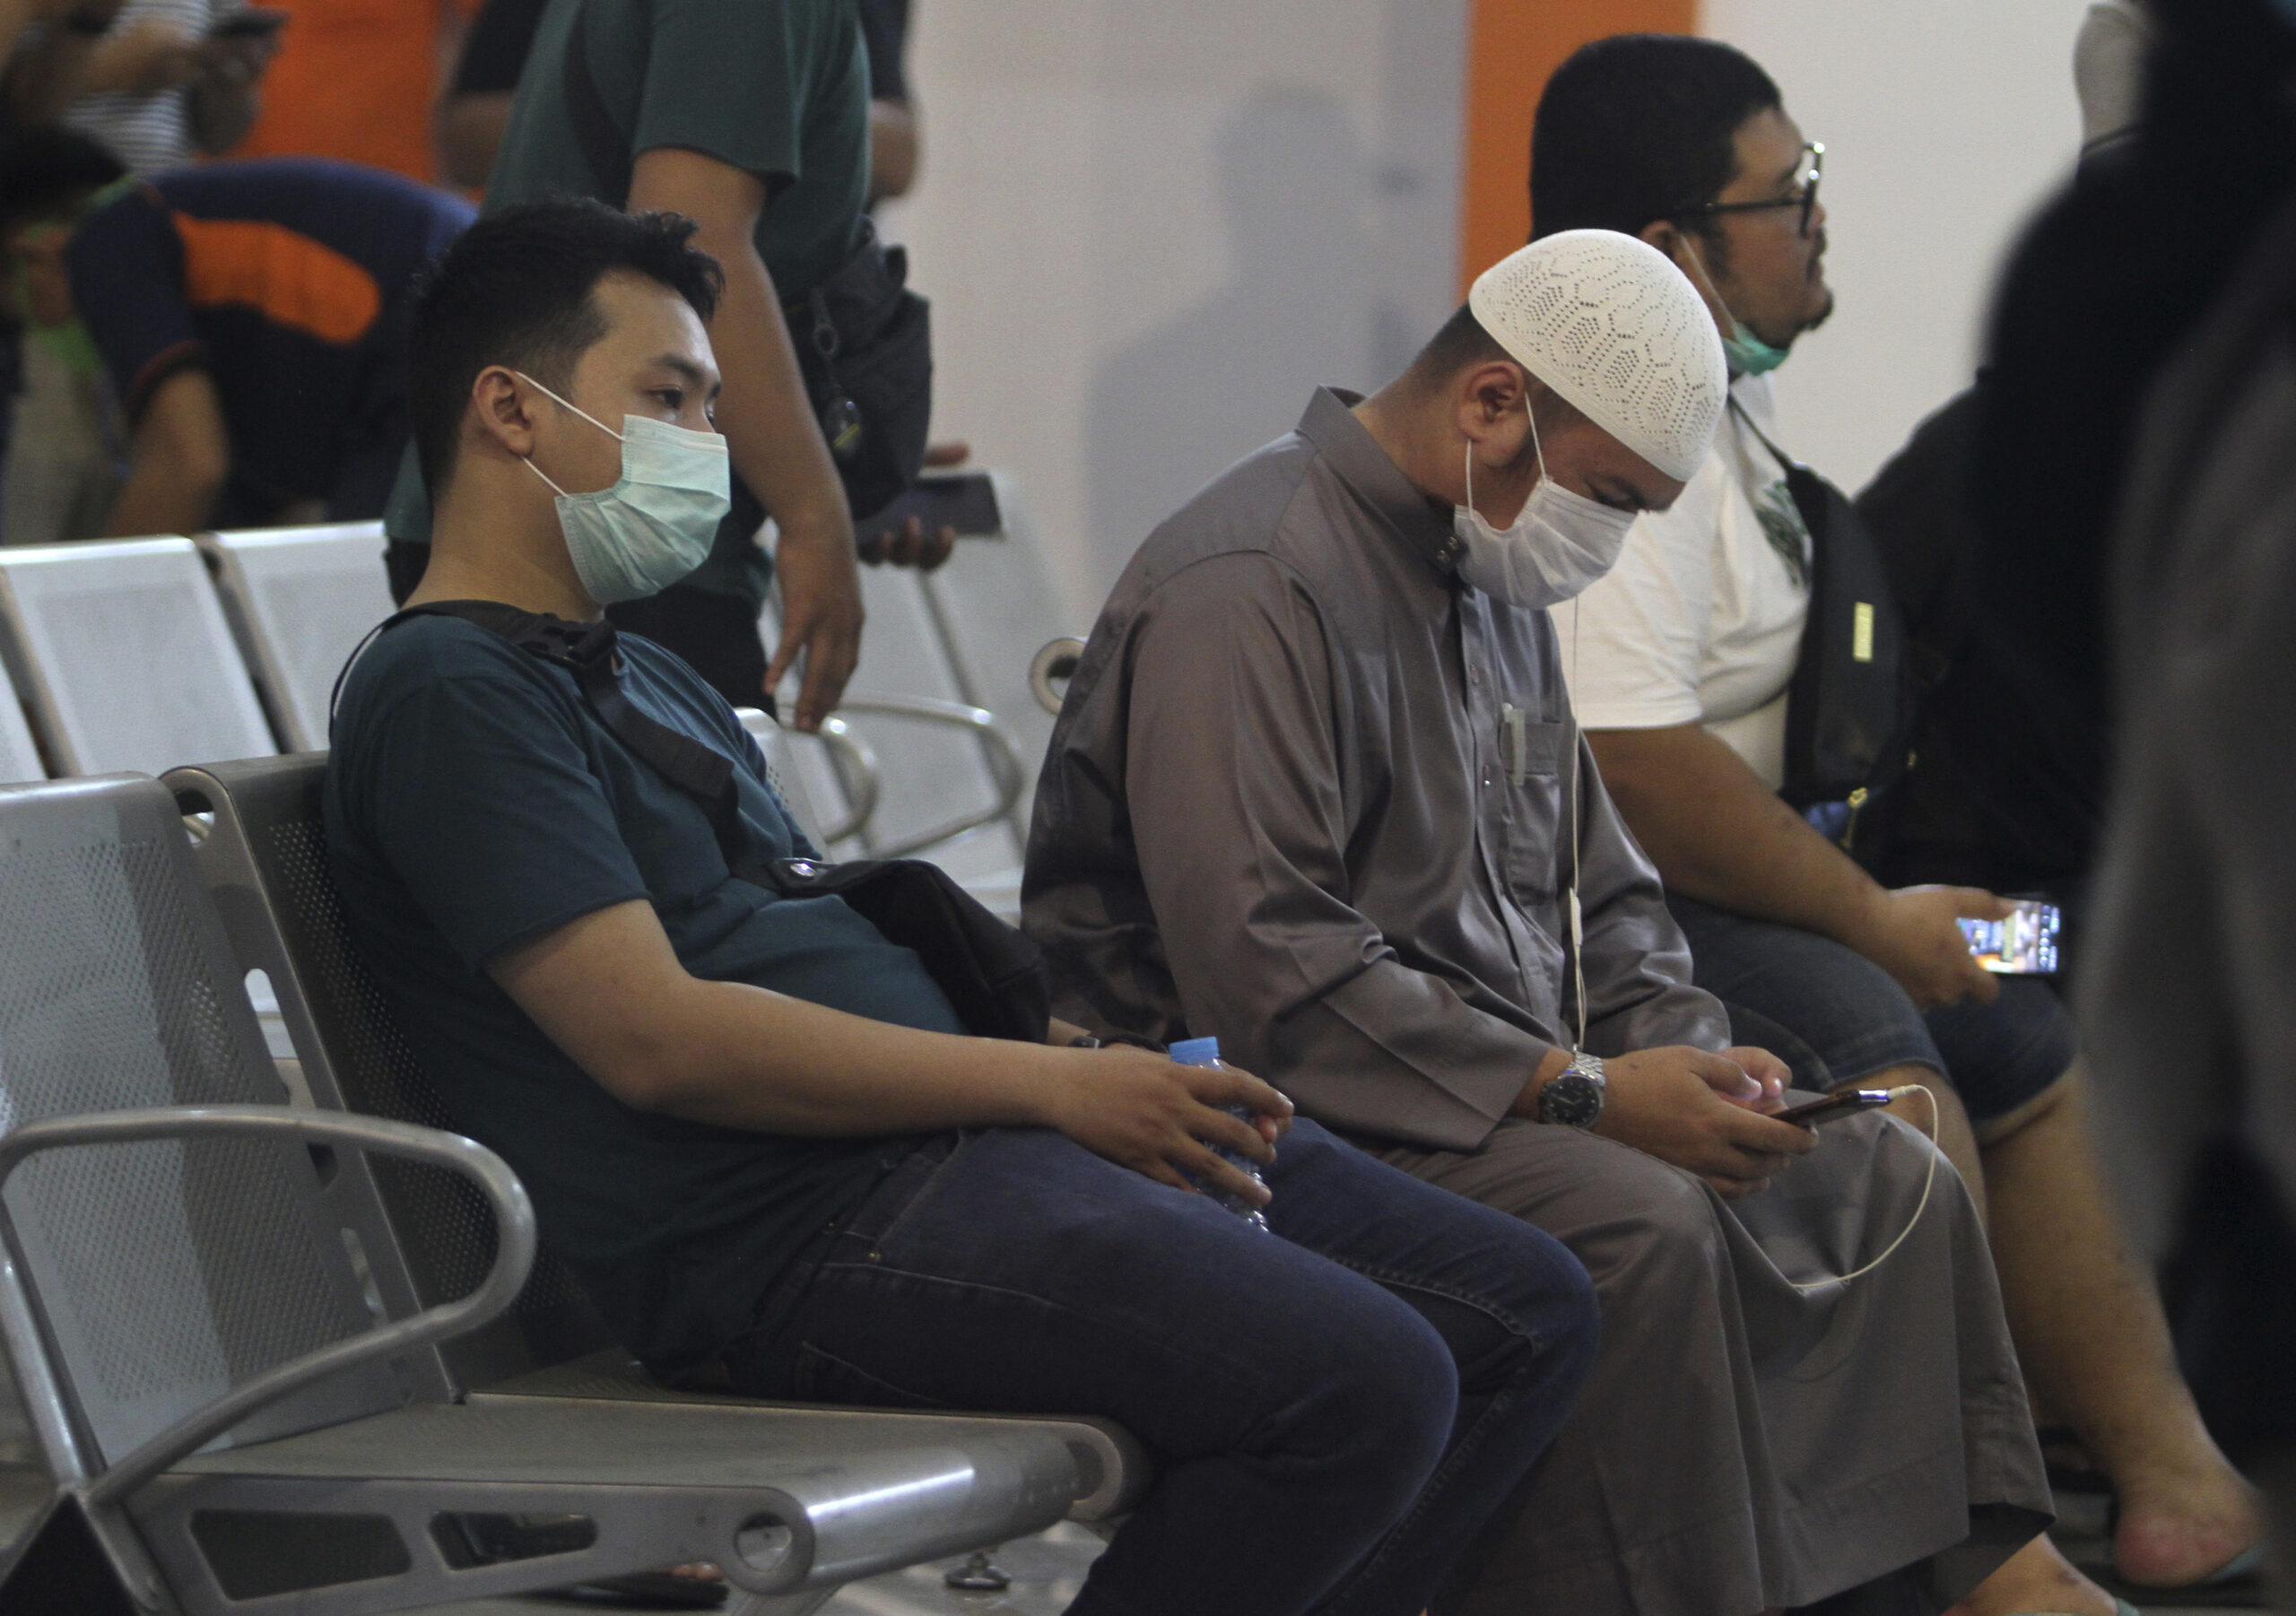 People wait for news on their relatives who are on board of Sriwijaya Air passenger jet that lost contact with air traffic controllers after take off, at Soepadio International Airport in Pontianak, West Kalimantan, Indonesia, Saturday, Jan. 9, 2021. A Sriwijaya Air passenger jet with 56 passengers and six crew members onboard, lost contact with air traffic controllers after taking off from Indonesia's capital on Saturday on a domestic flight, officials said. (AP Photo/Helmansyah)